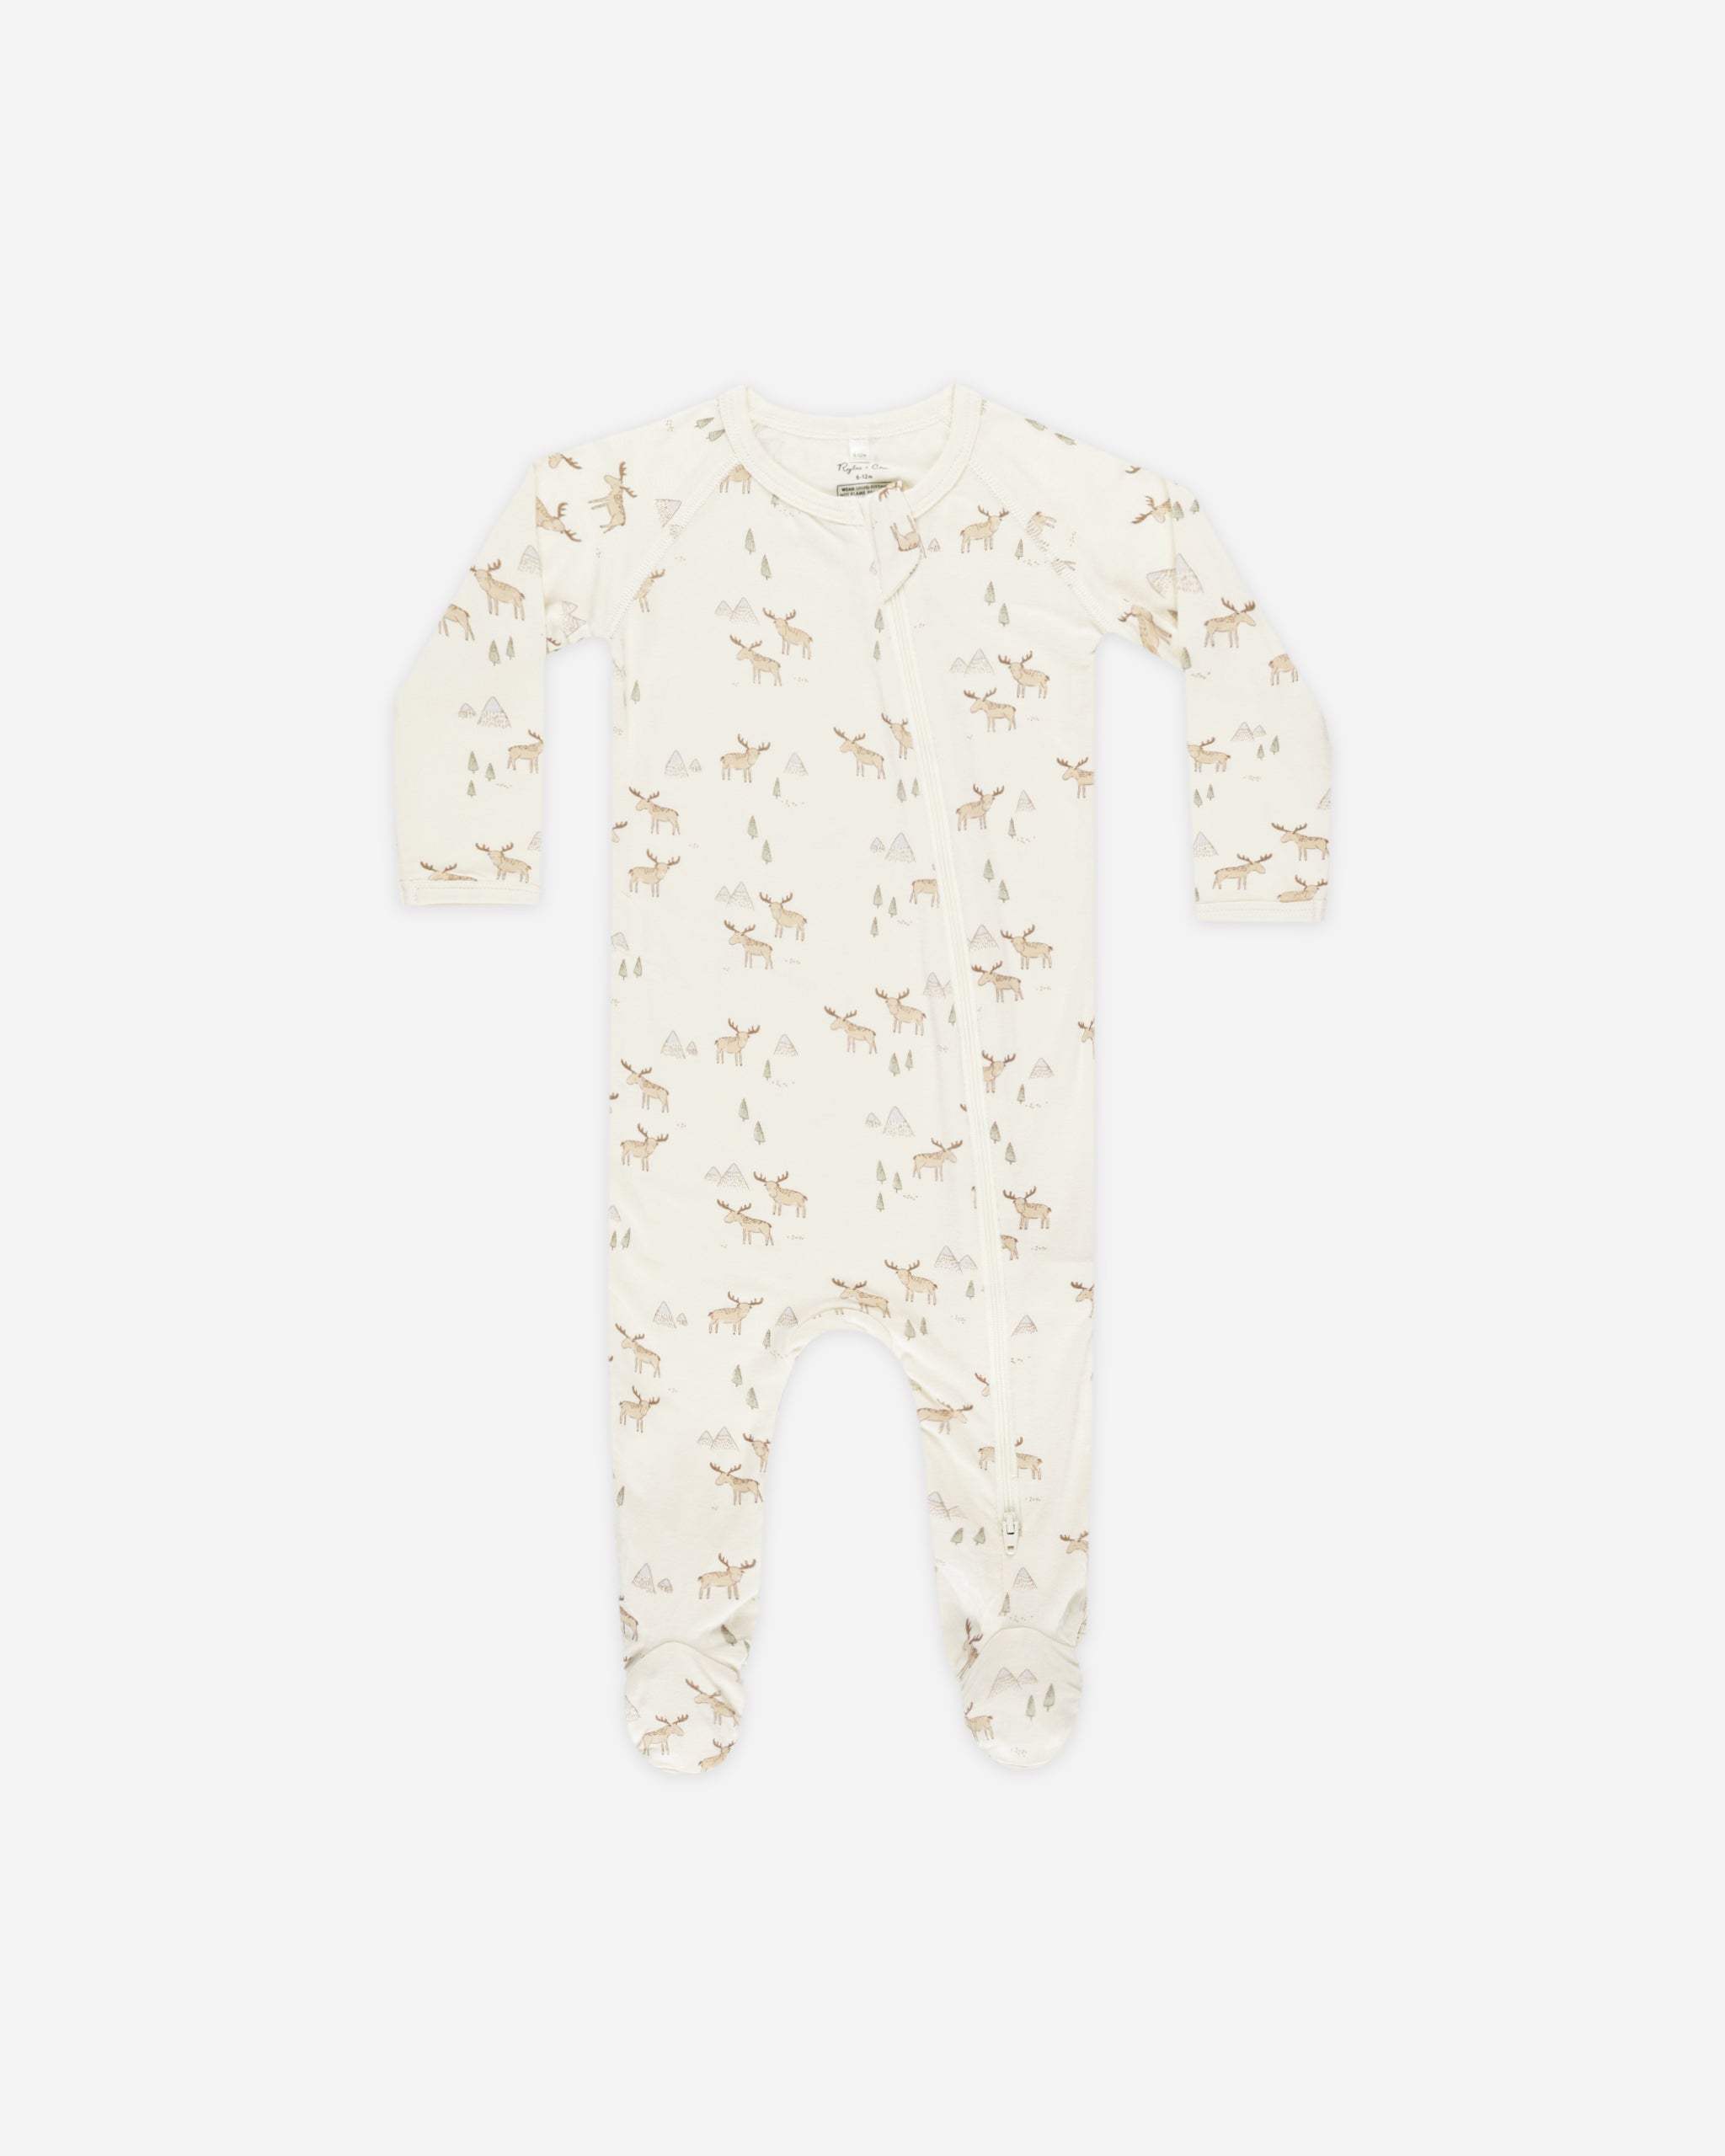 Footed Sleeper || Moose - Rylee + Cru | Kids Clothes | Trendy Baby Clothes | Modern Infant Outfits |